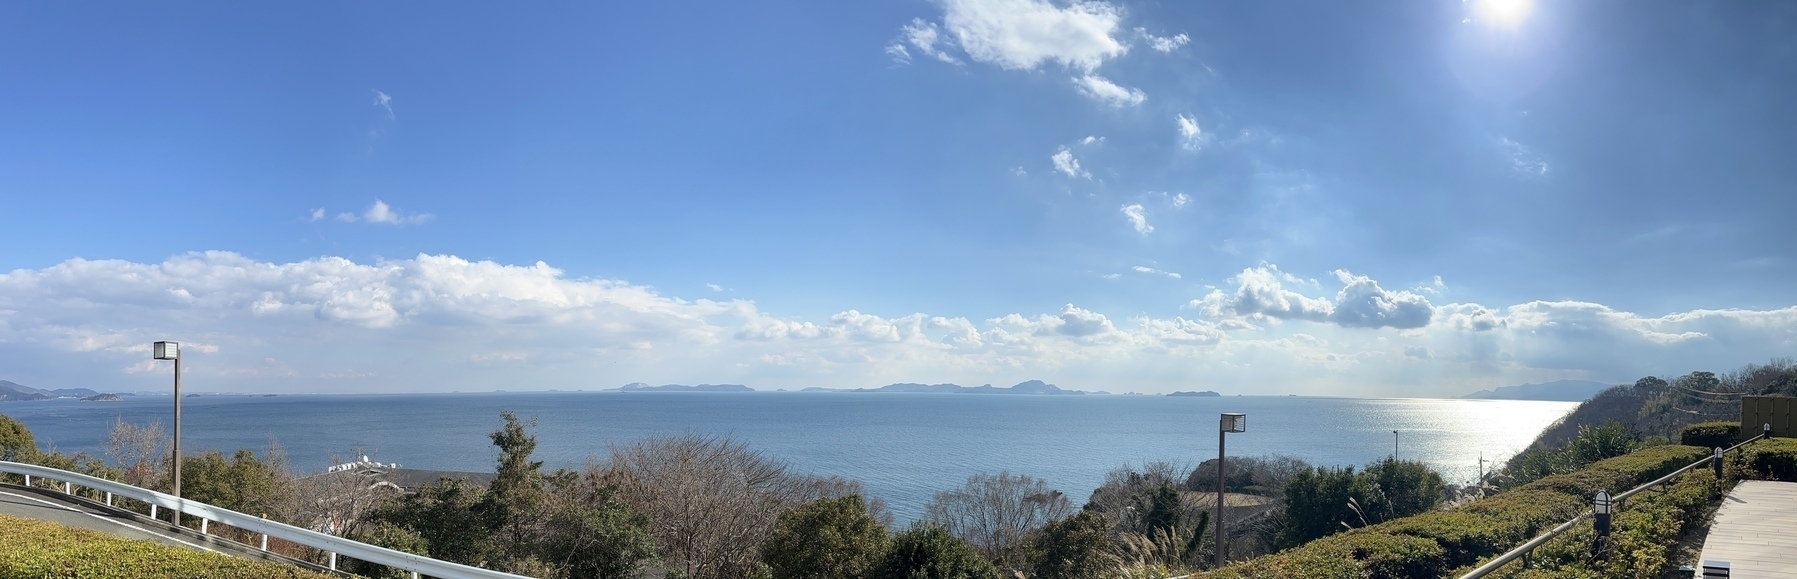 Panorama of the sea from high up. Some small uninhabited islands are across the way